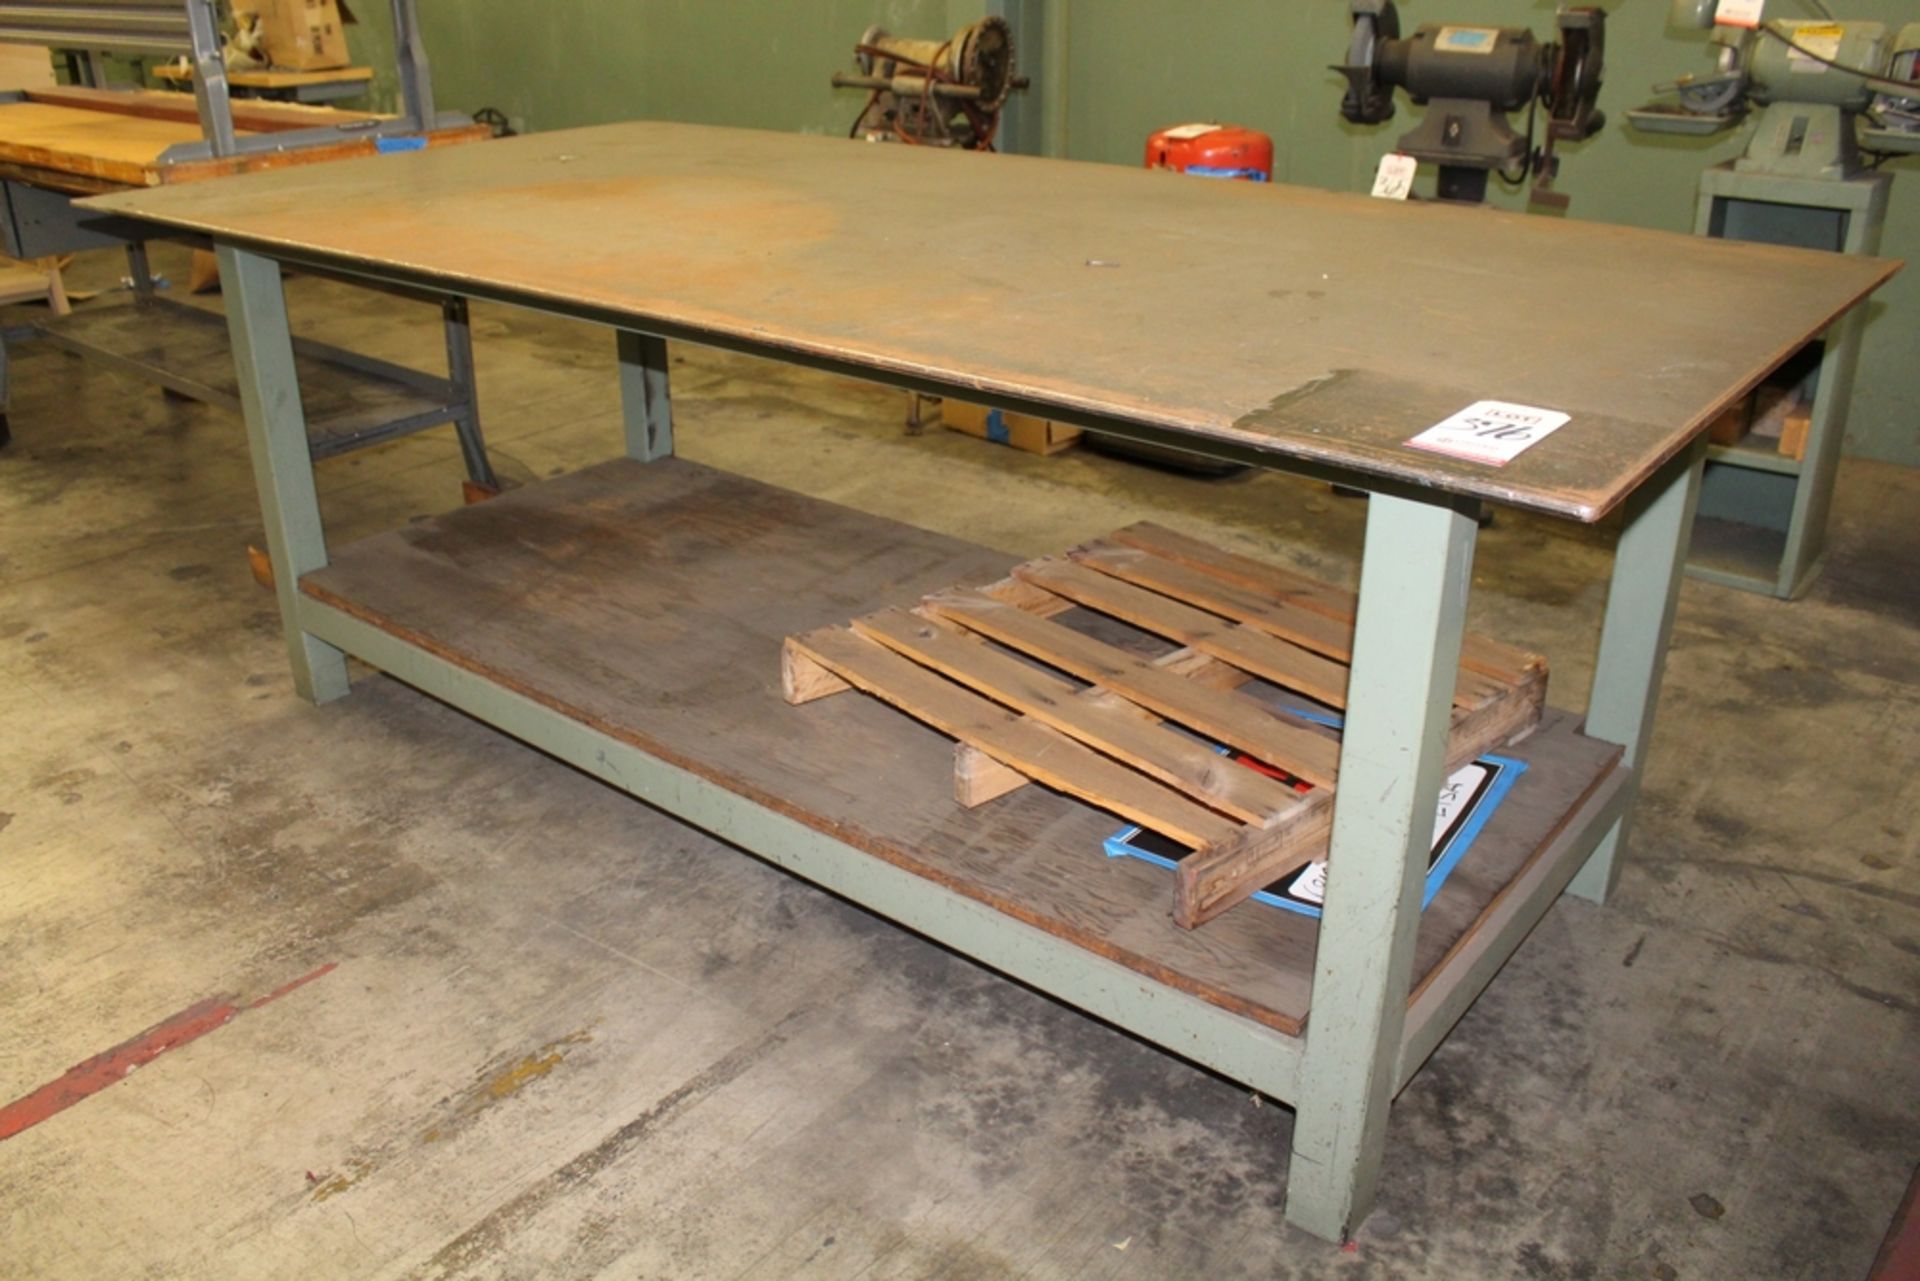 8' X 4' STEEL TABLE, 7/16" THICK TOP